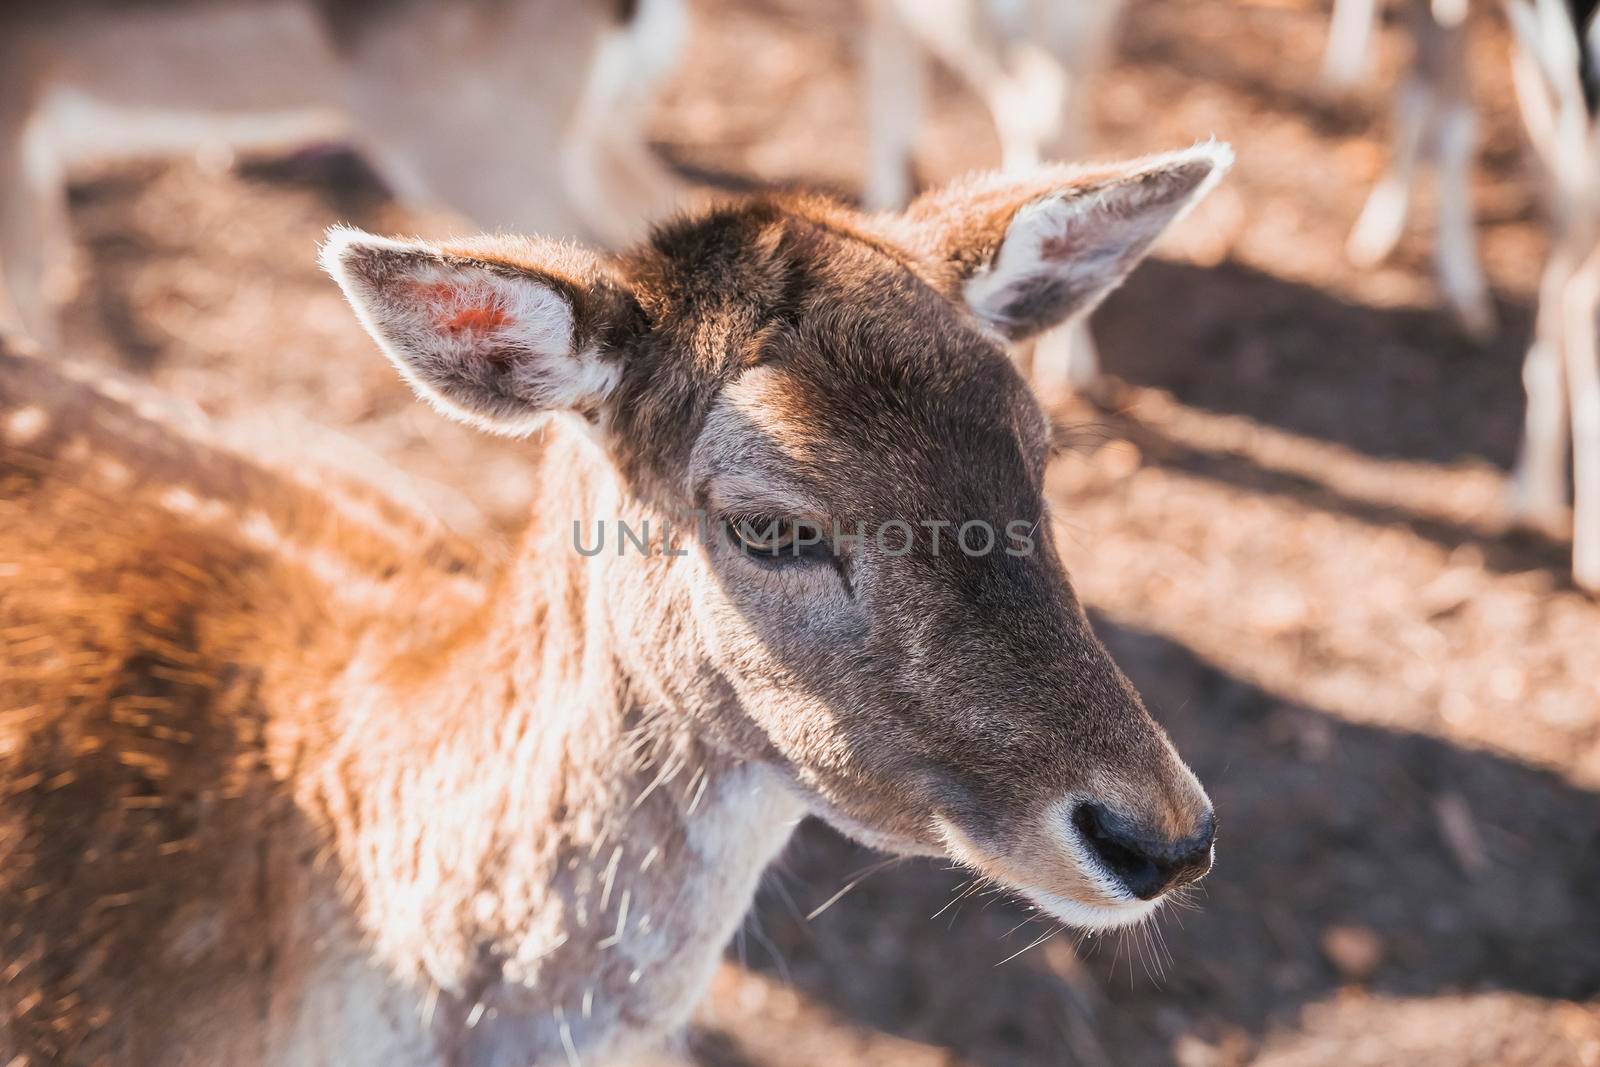 Charming deer face close-up. Nature in Denmark.